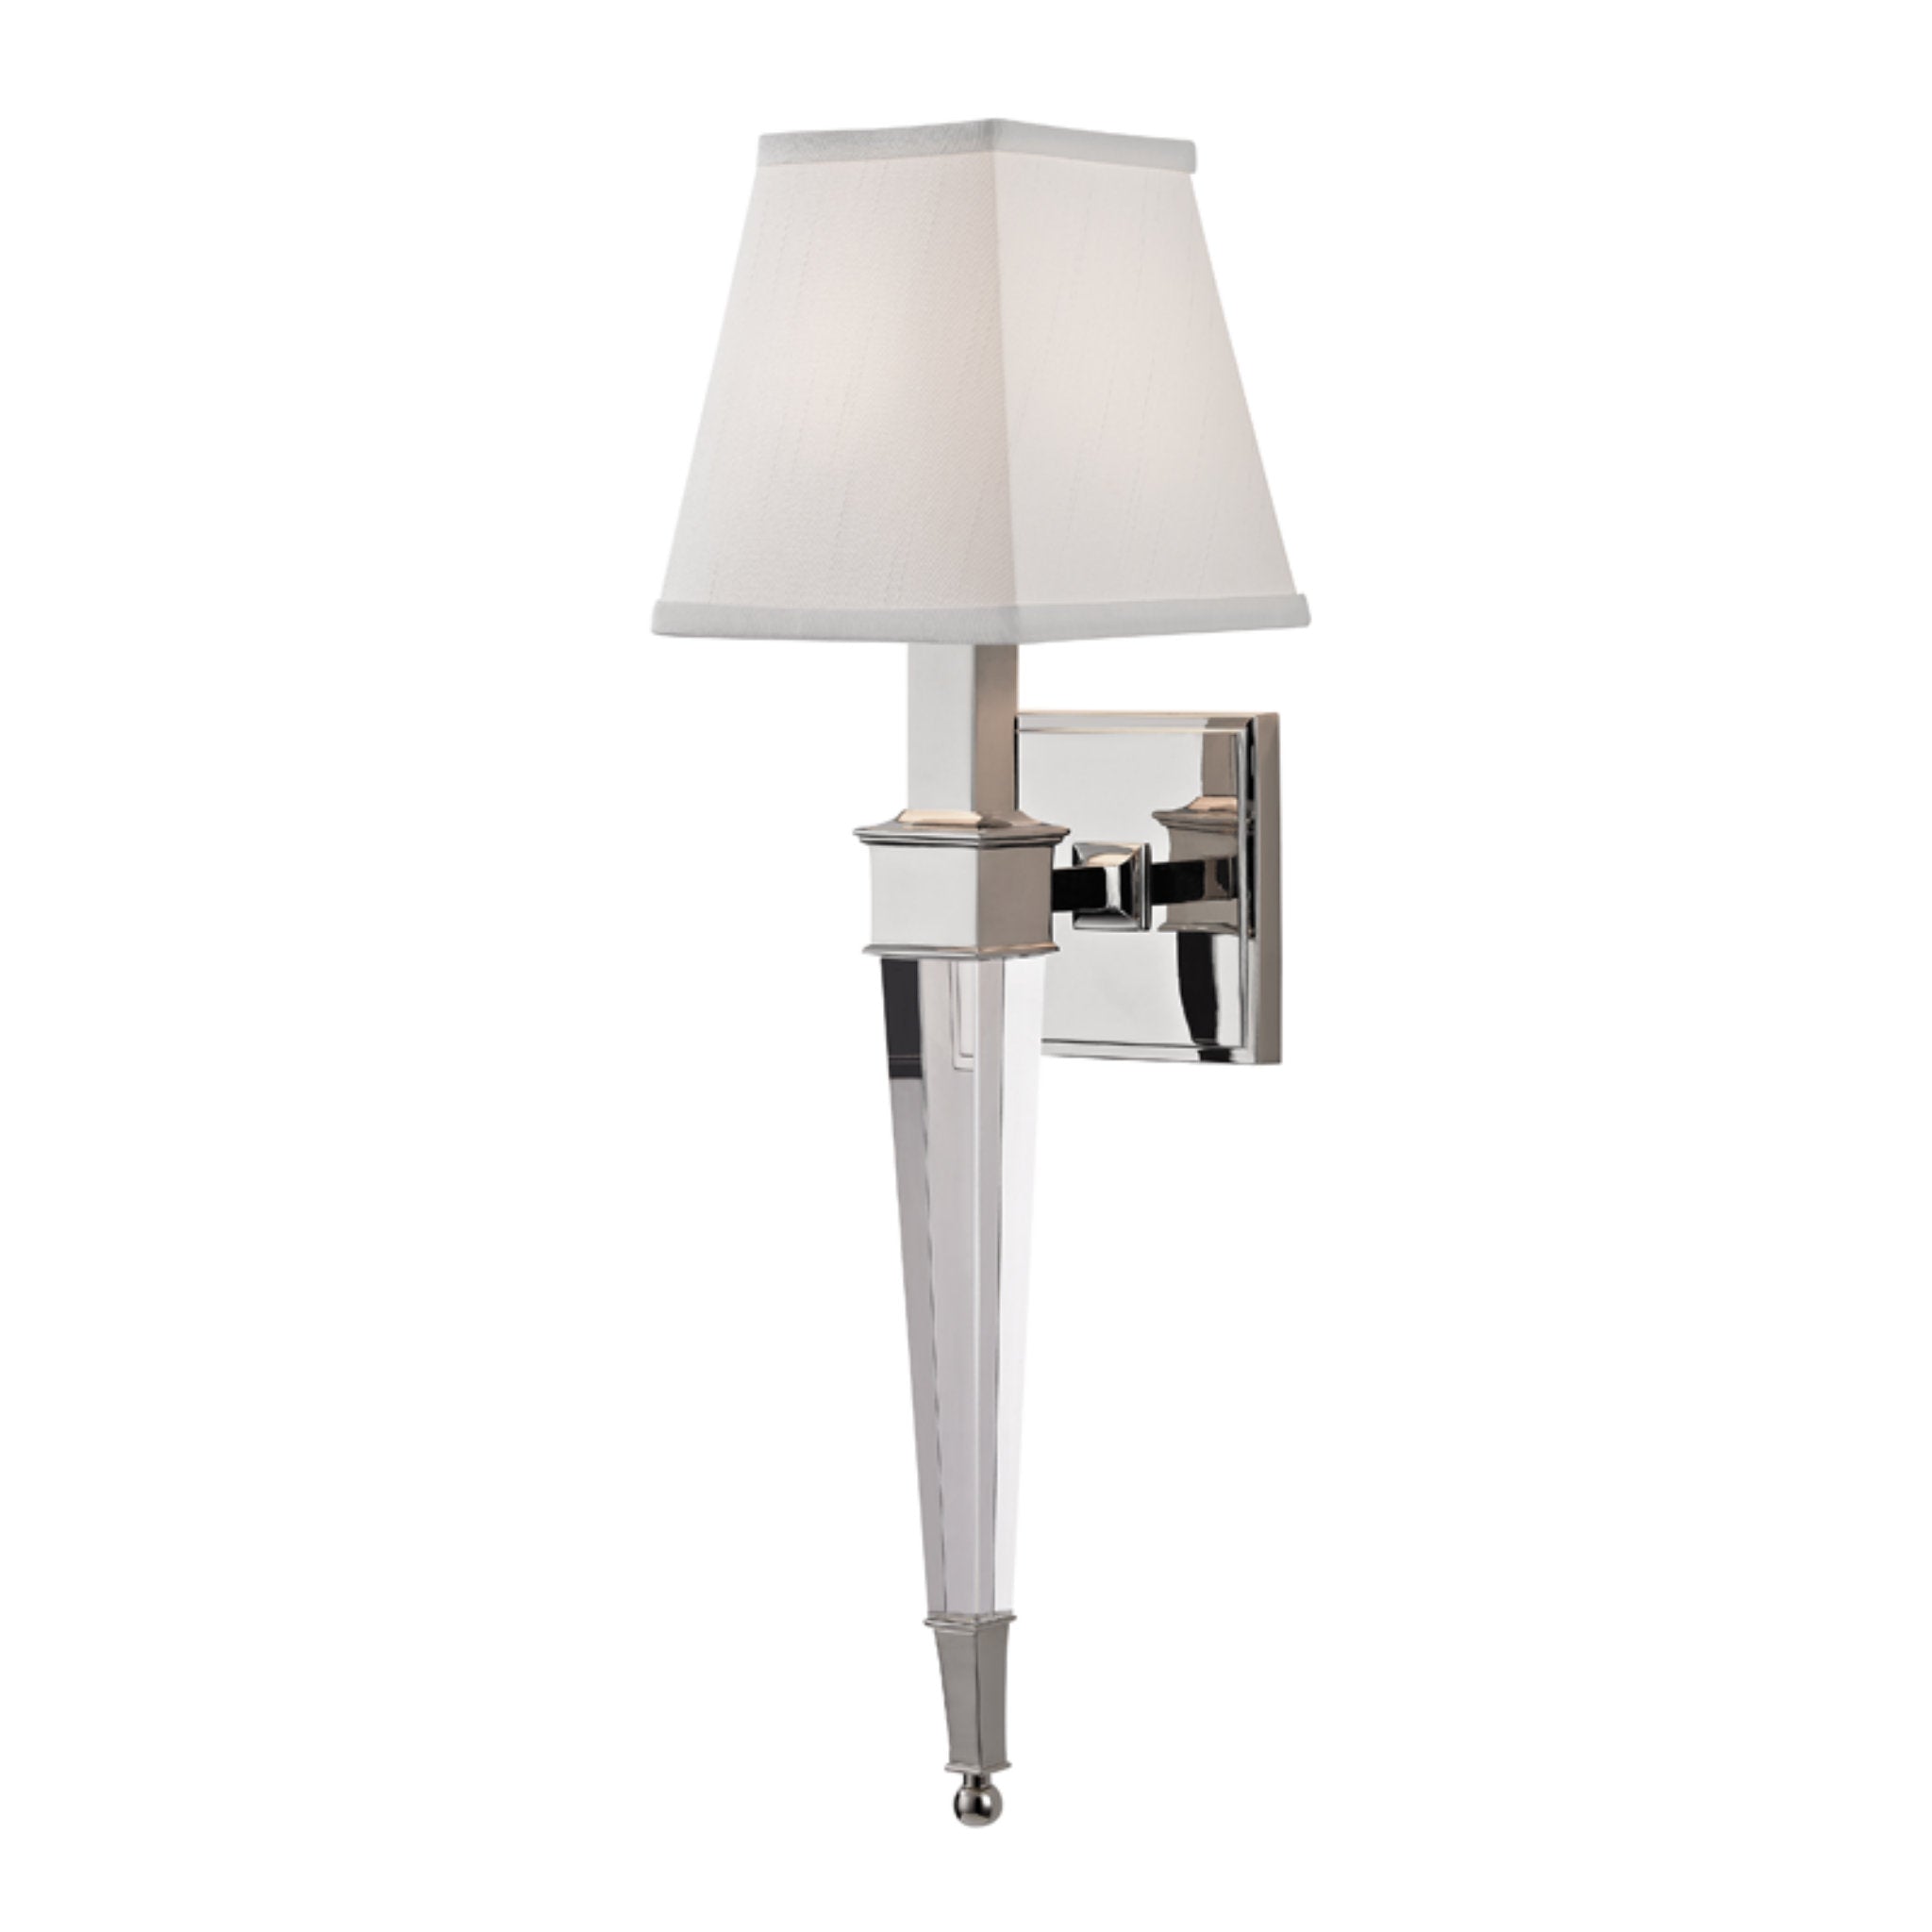 Ruskin 1 Light Wall Sconce in Polished Nickel Open Box